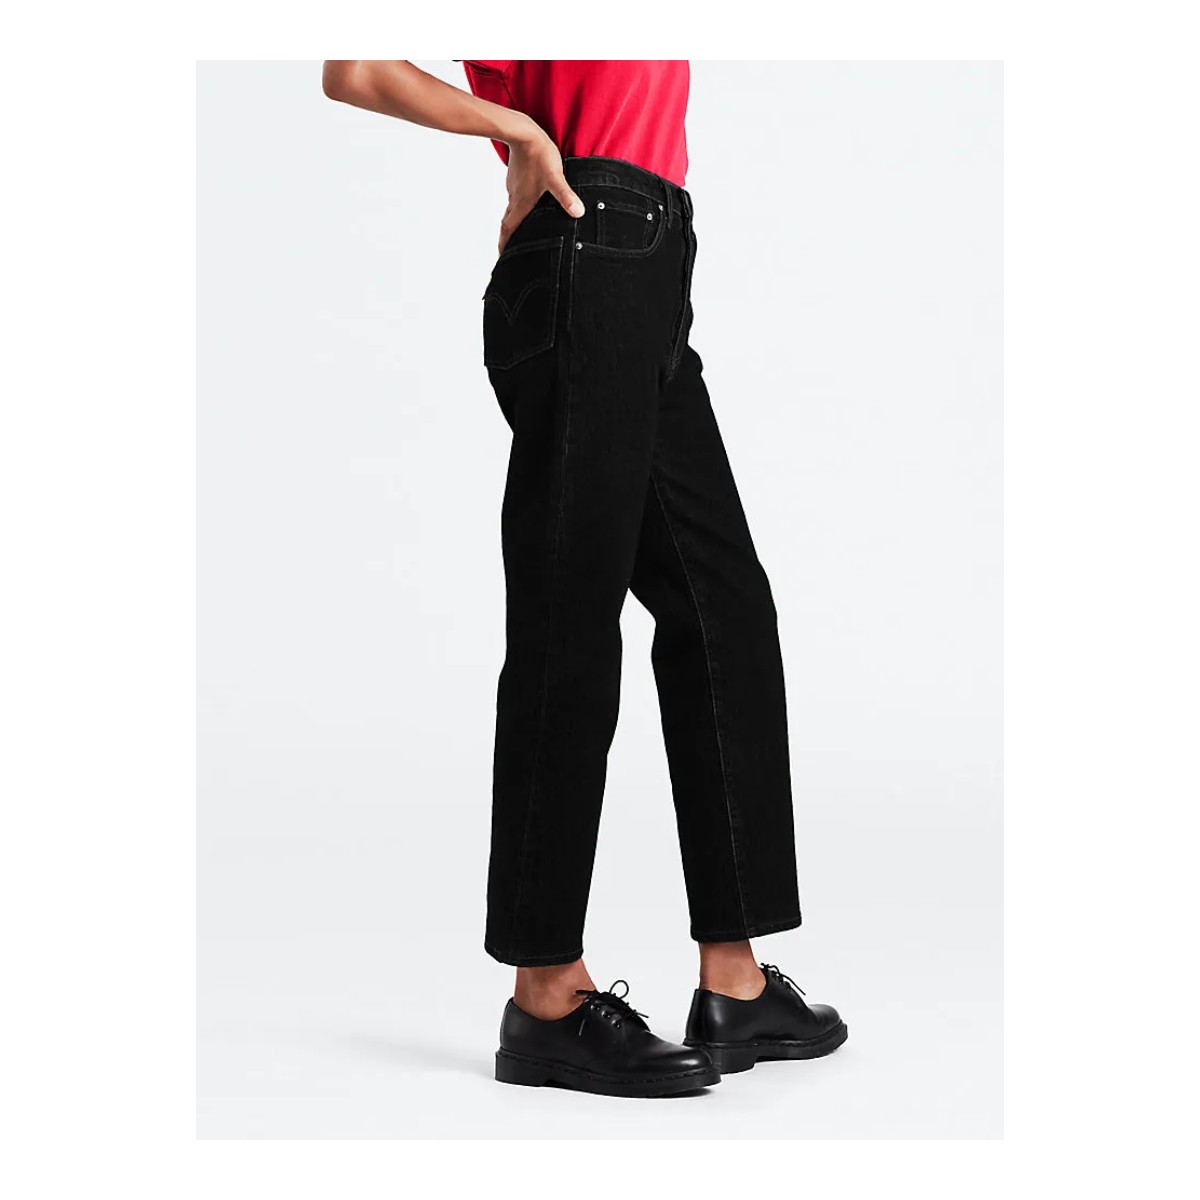 Levi's - Ribcage straight ankle